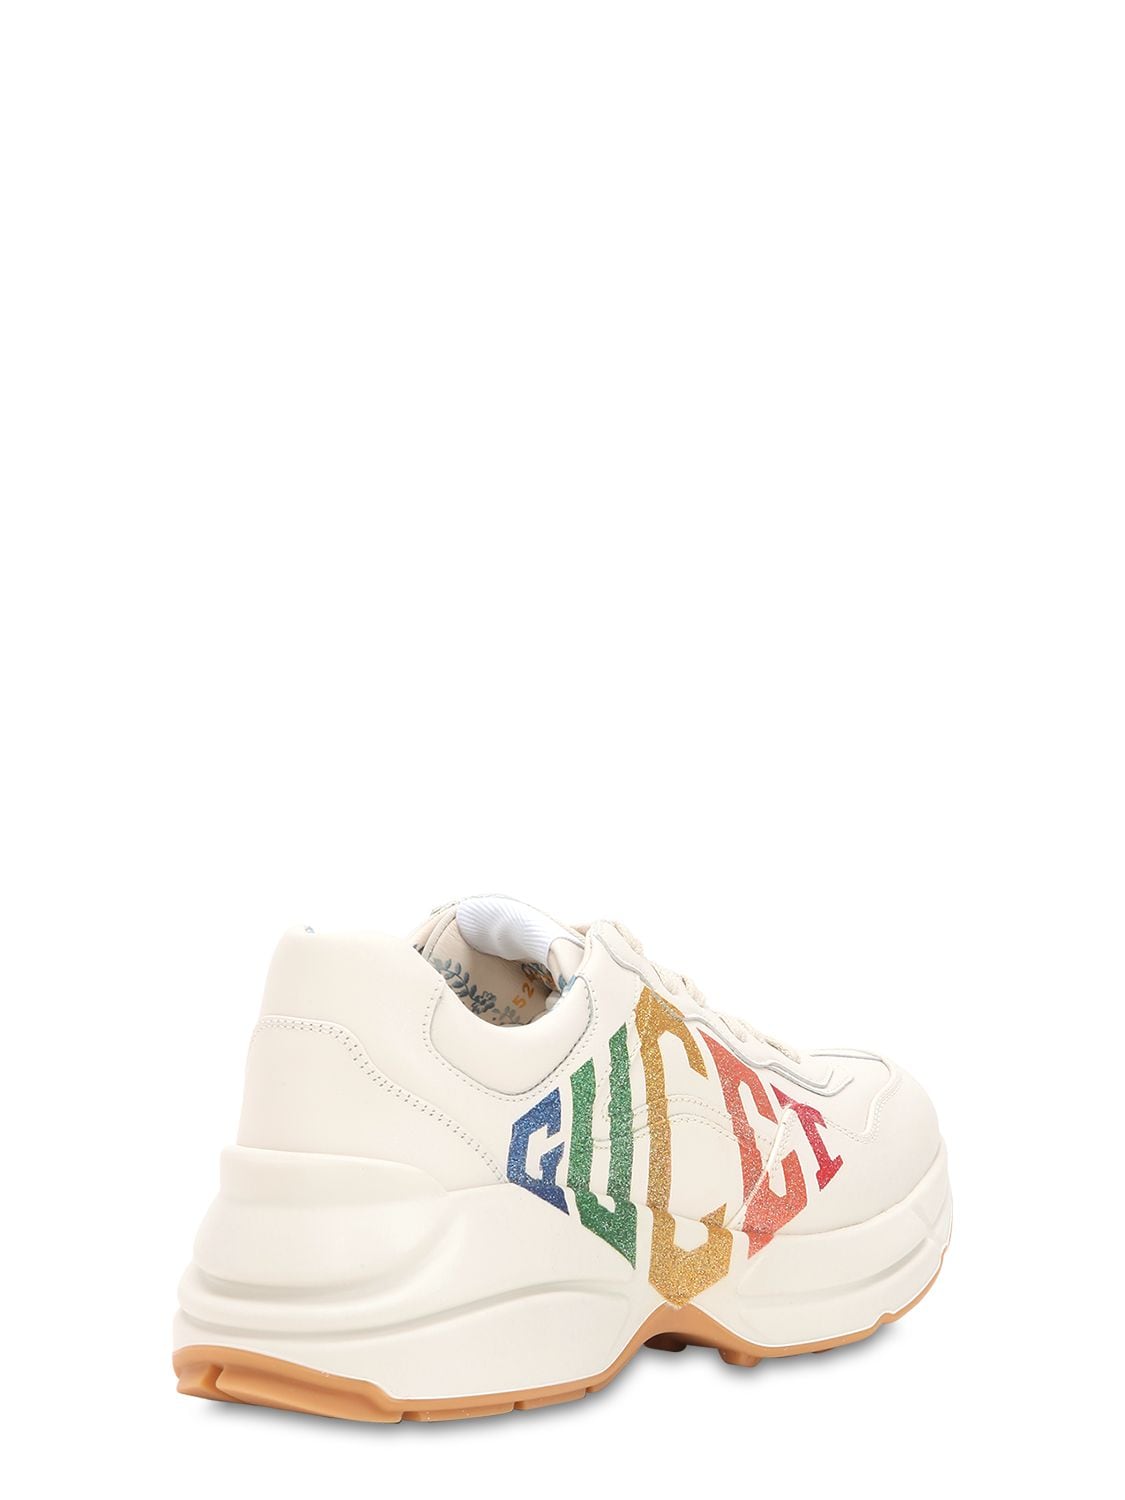 Shop Gucci 50mm Rhyton Glitter & Leather Sneakers In White